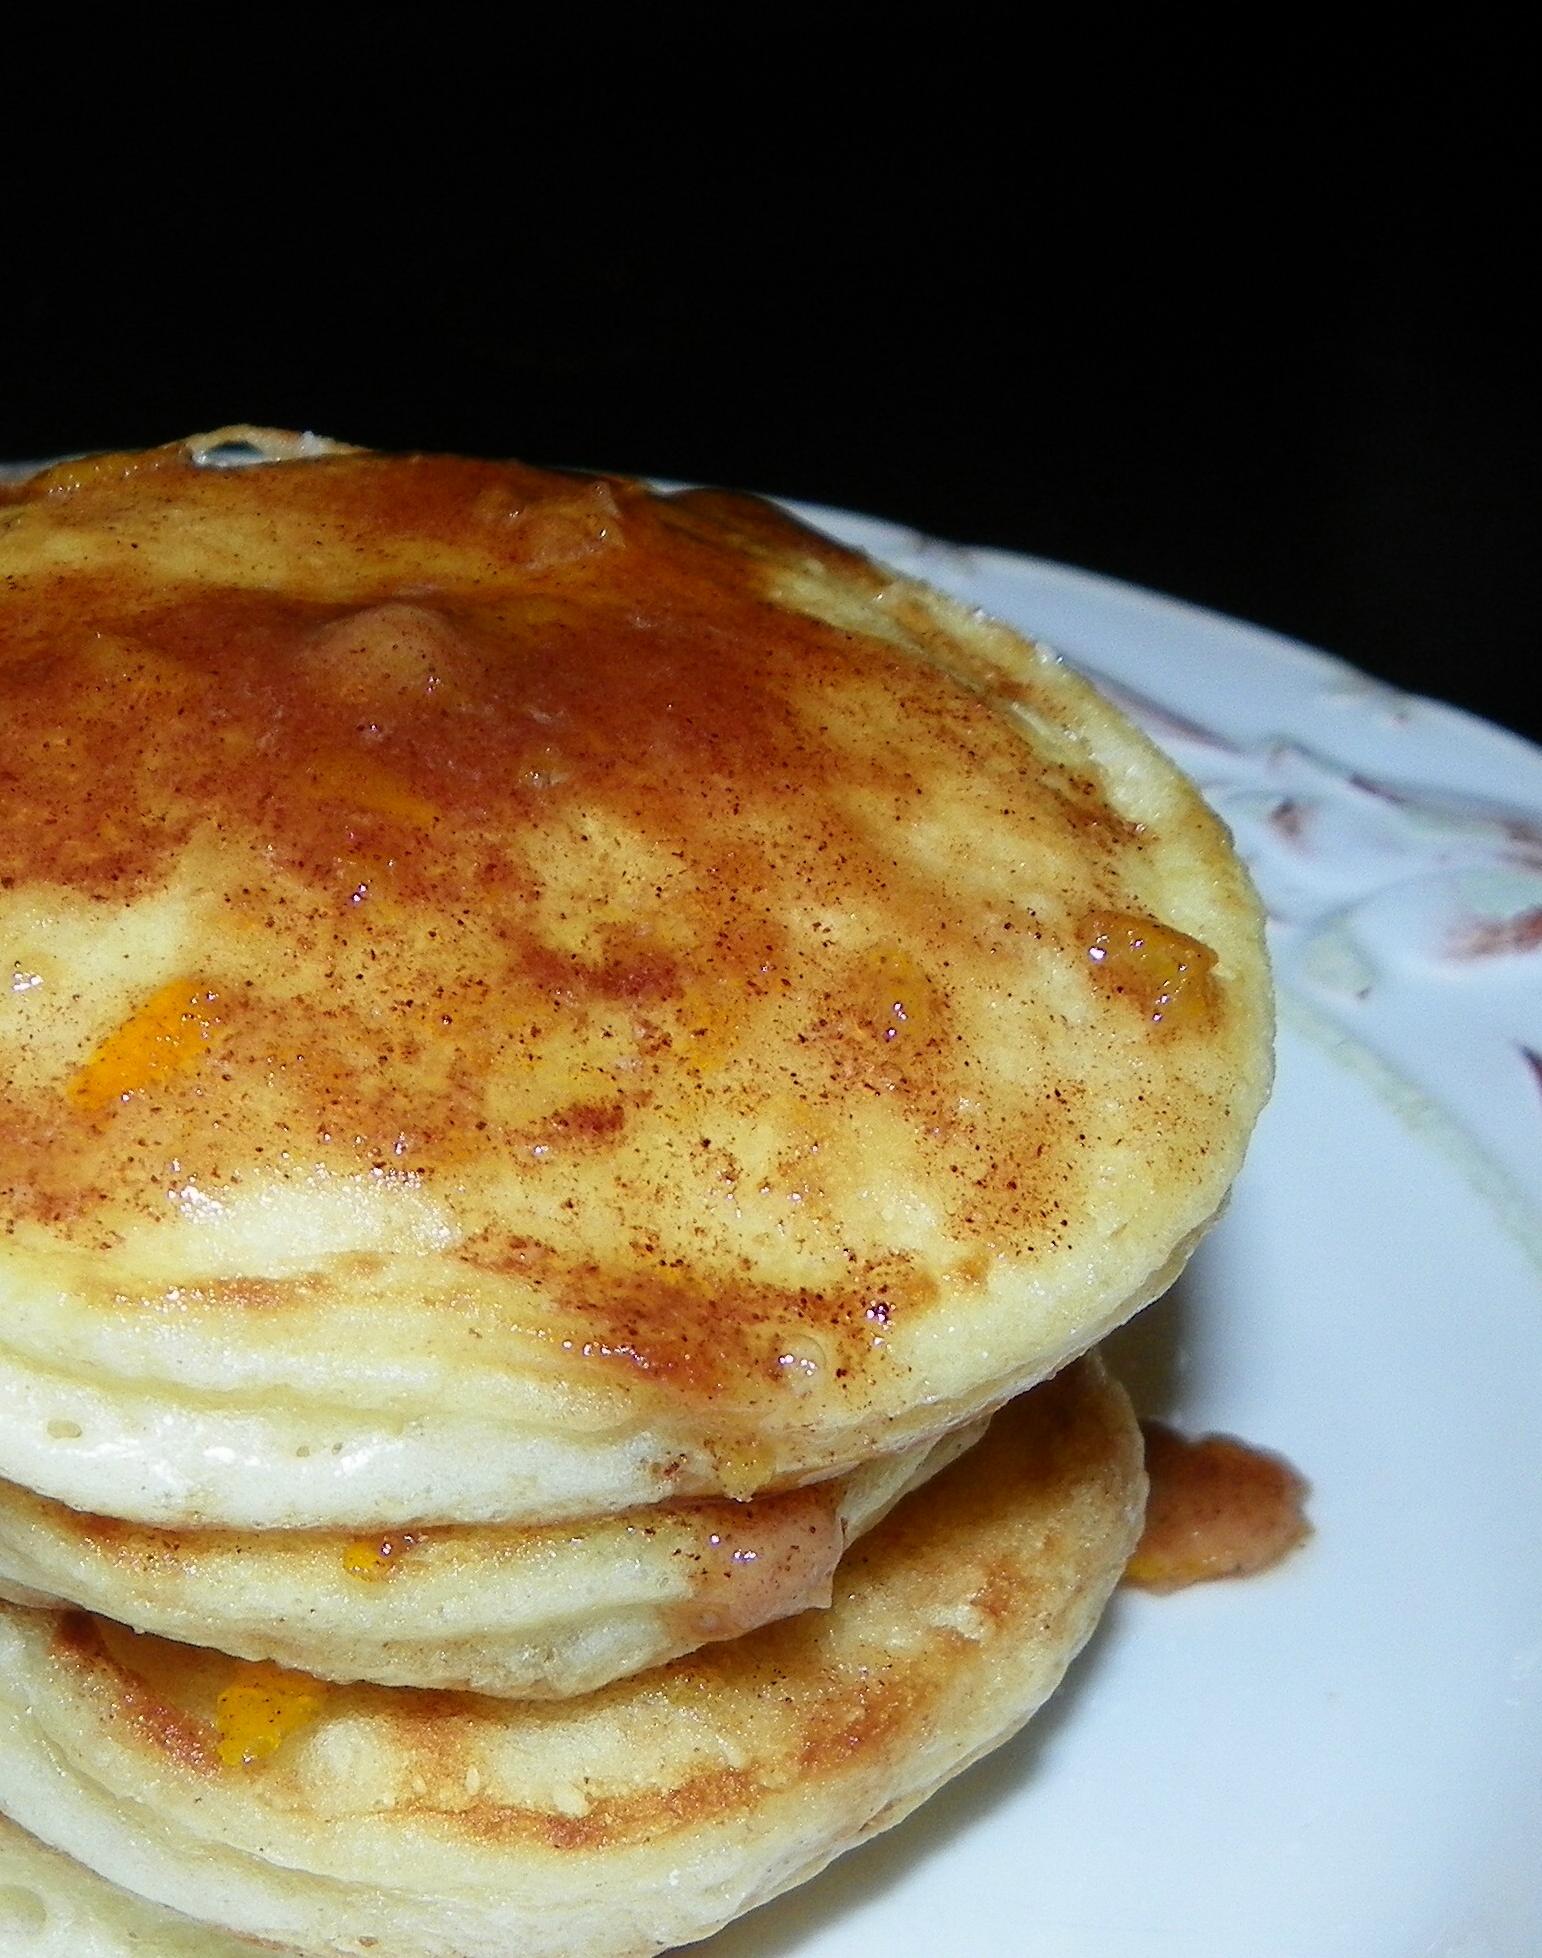  Don't let their size fool you - these pikelets are packed with flavour.